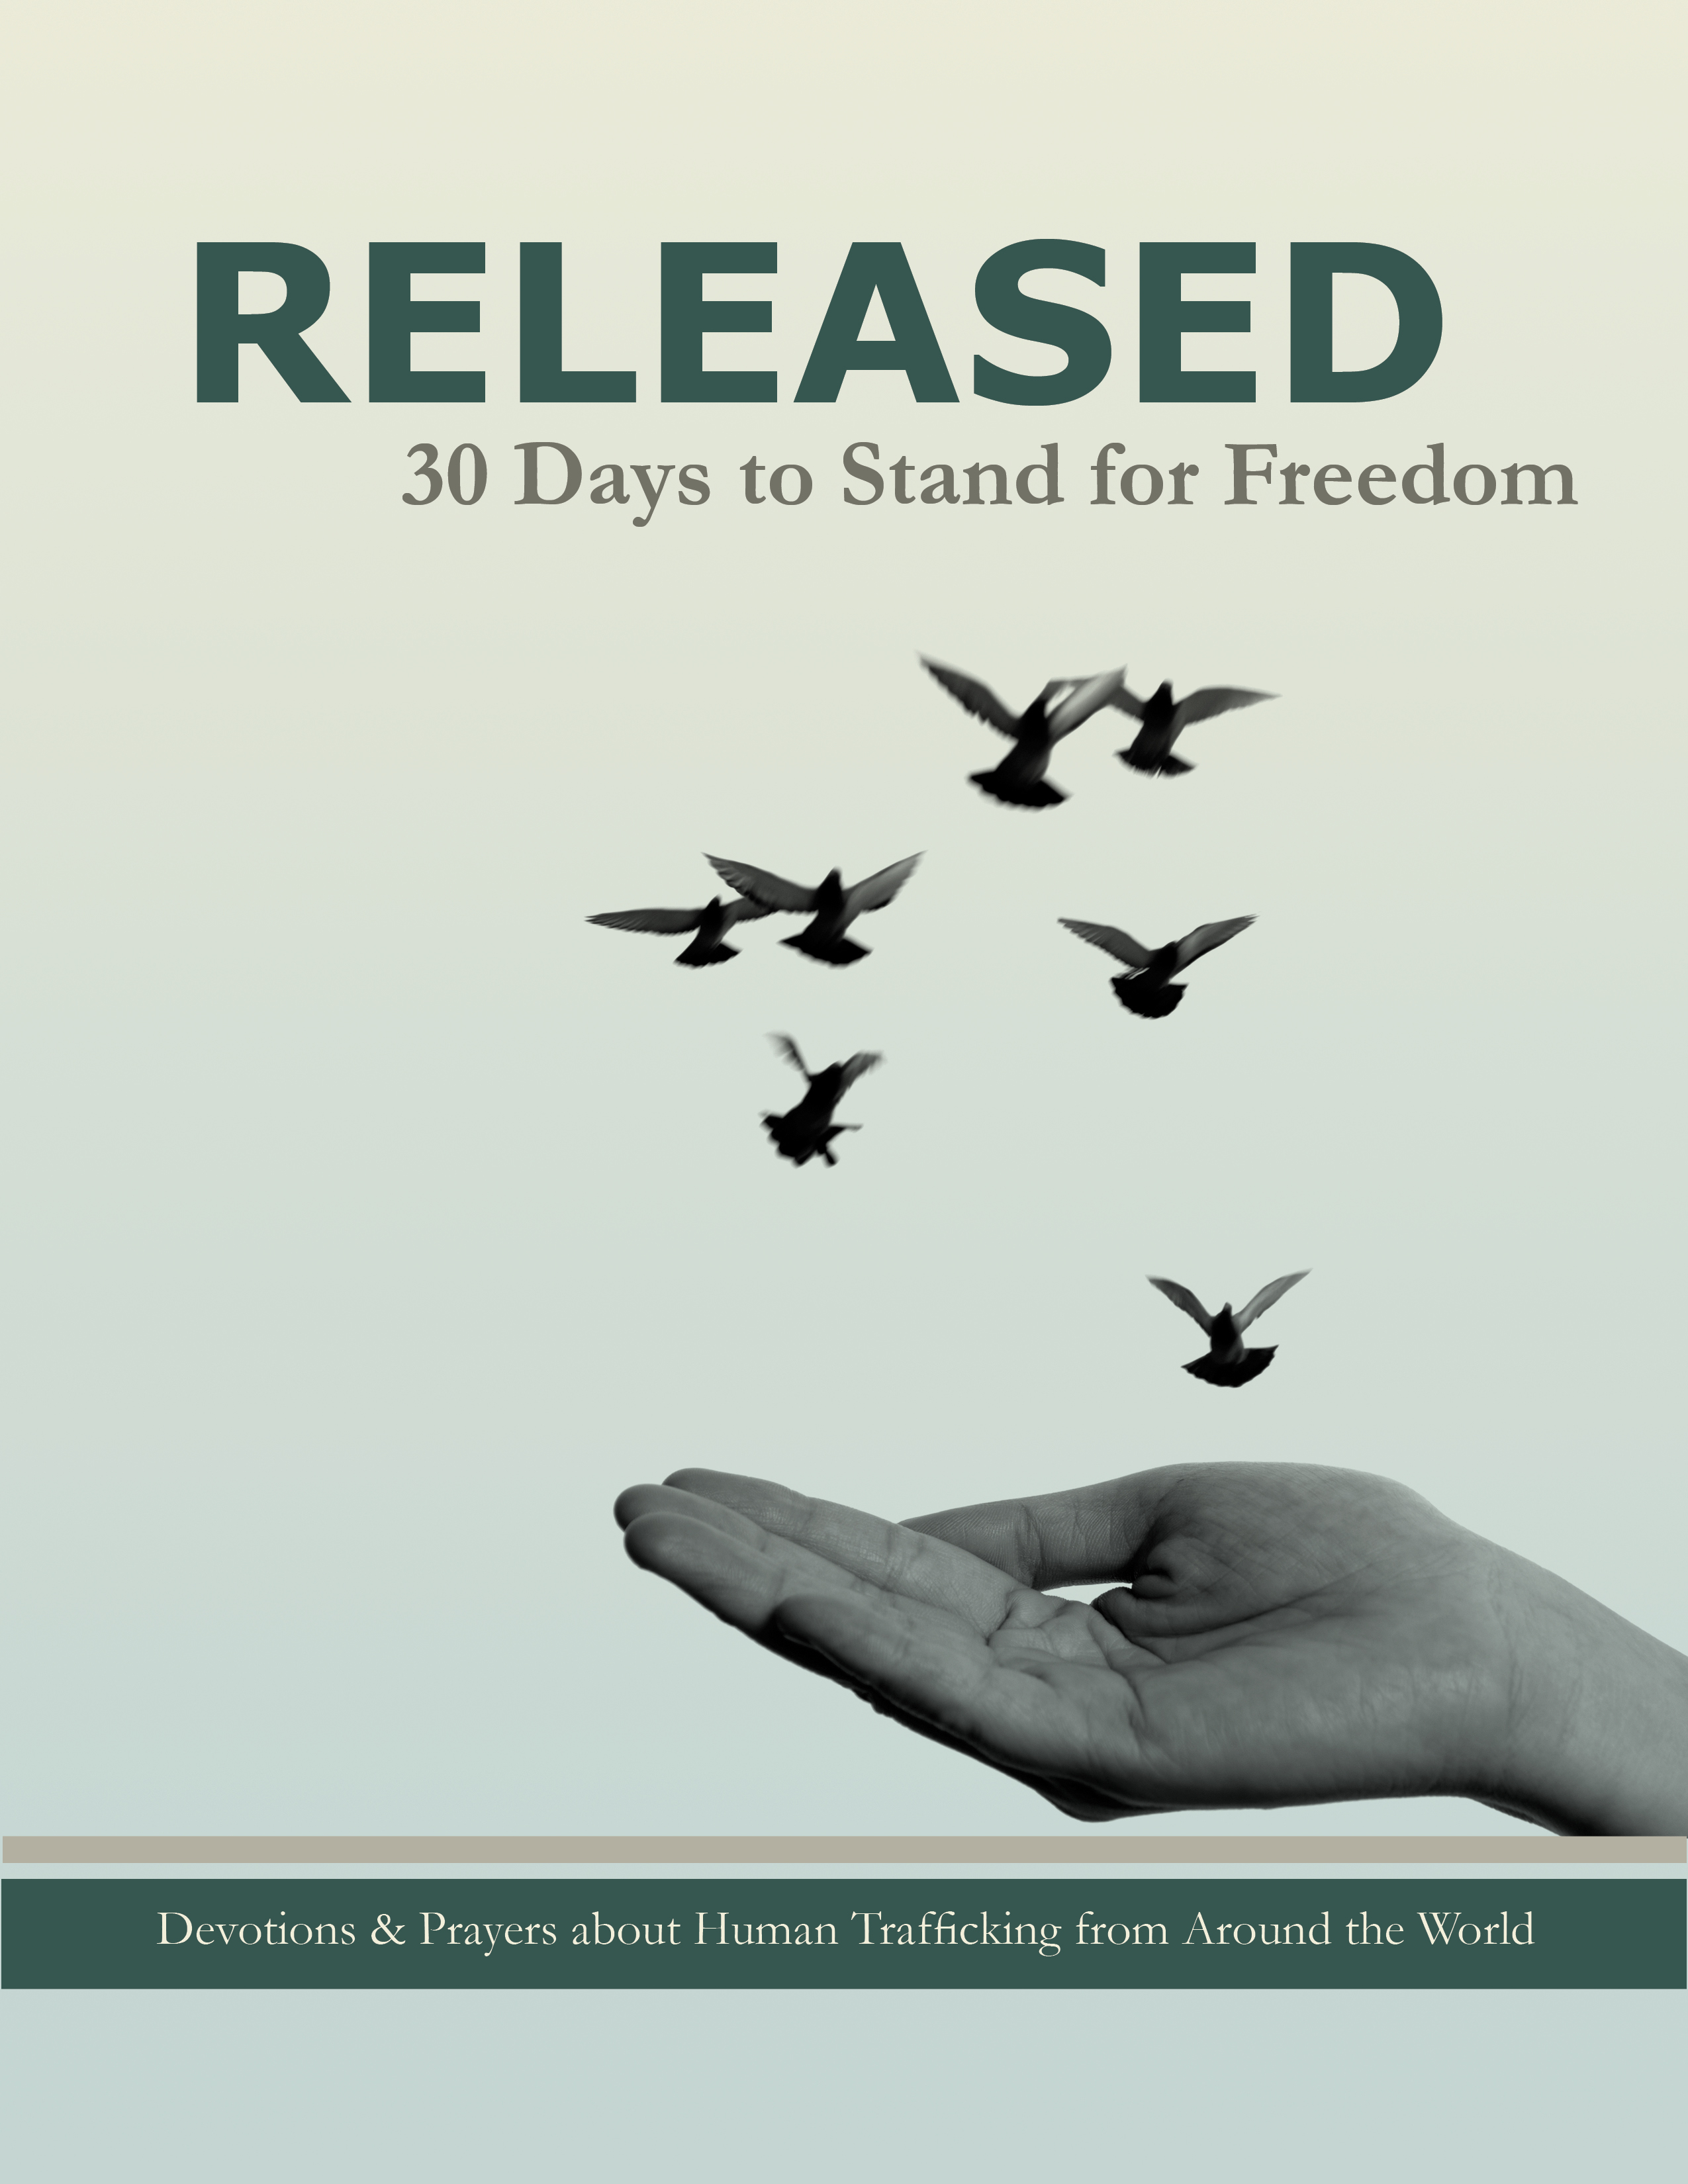 Released: 30 Days to Stand for Freedom